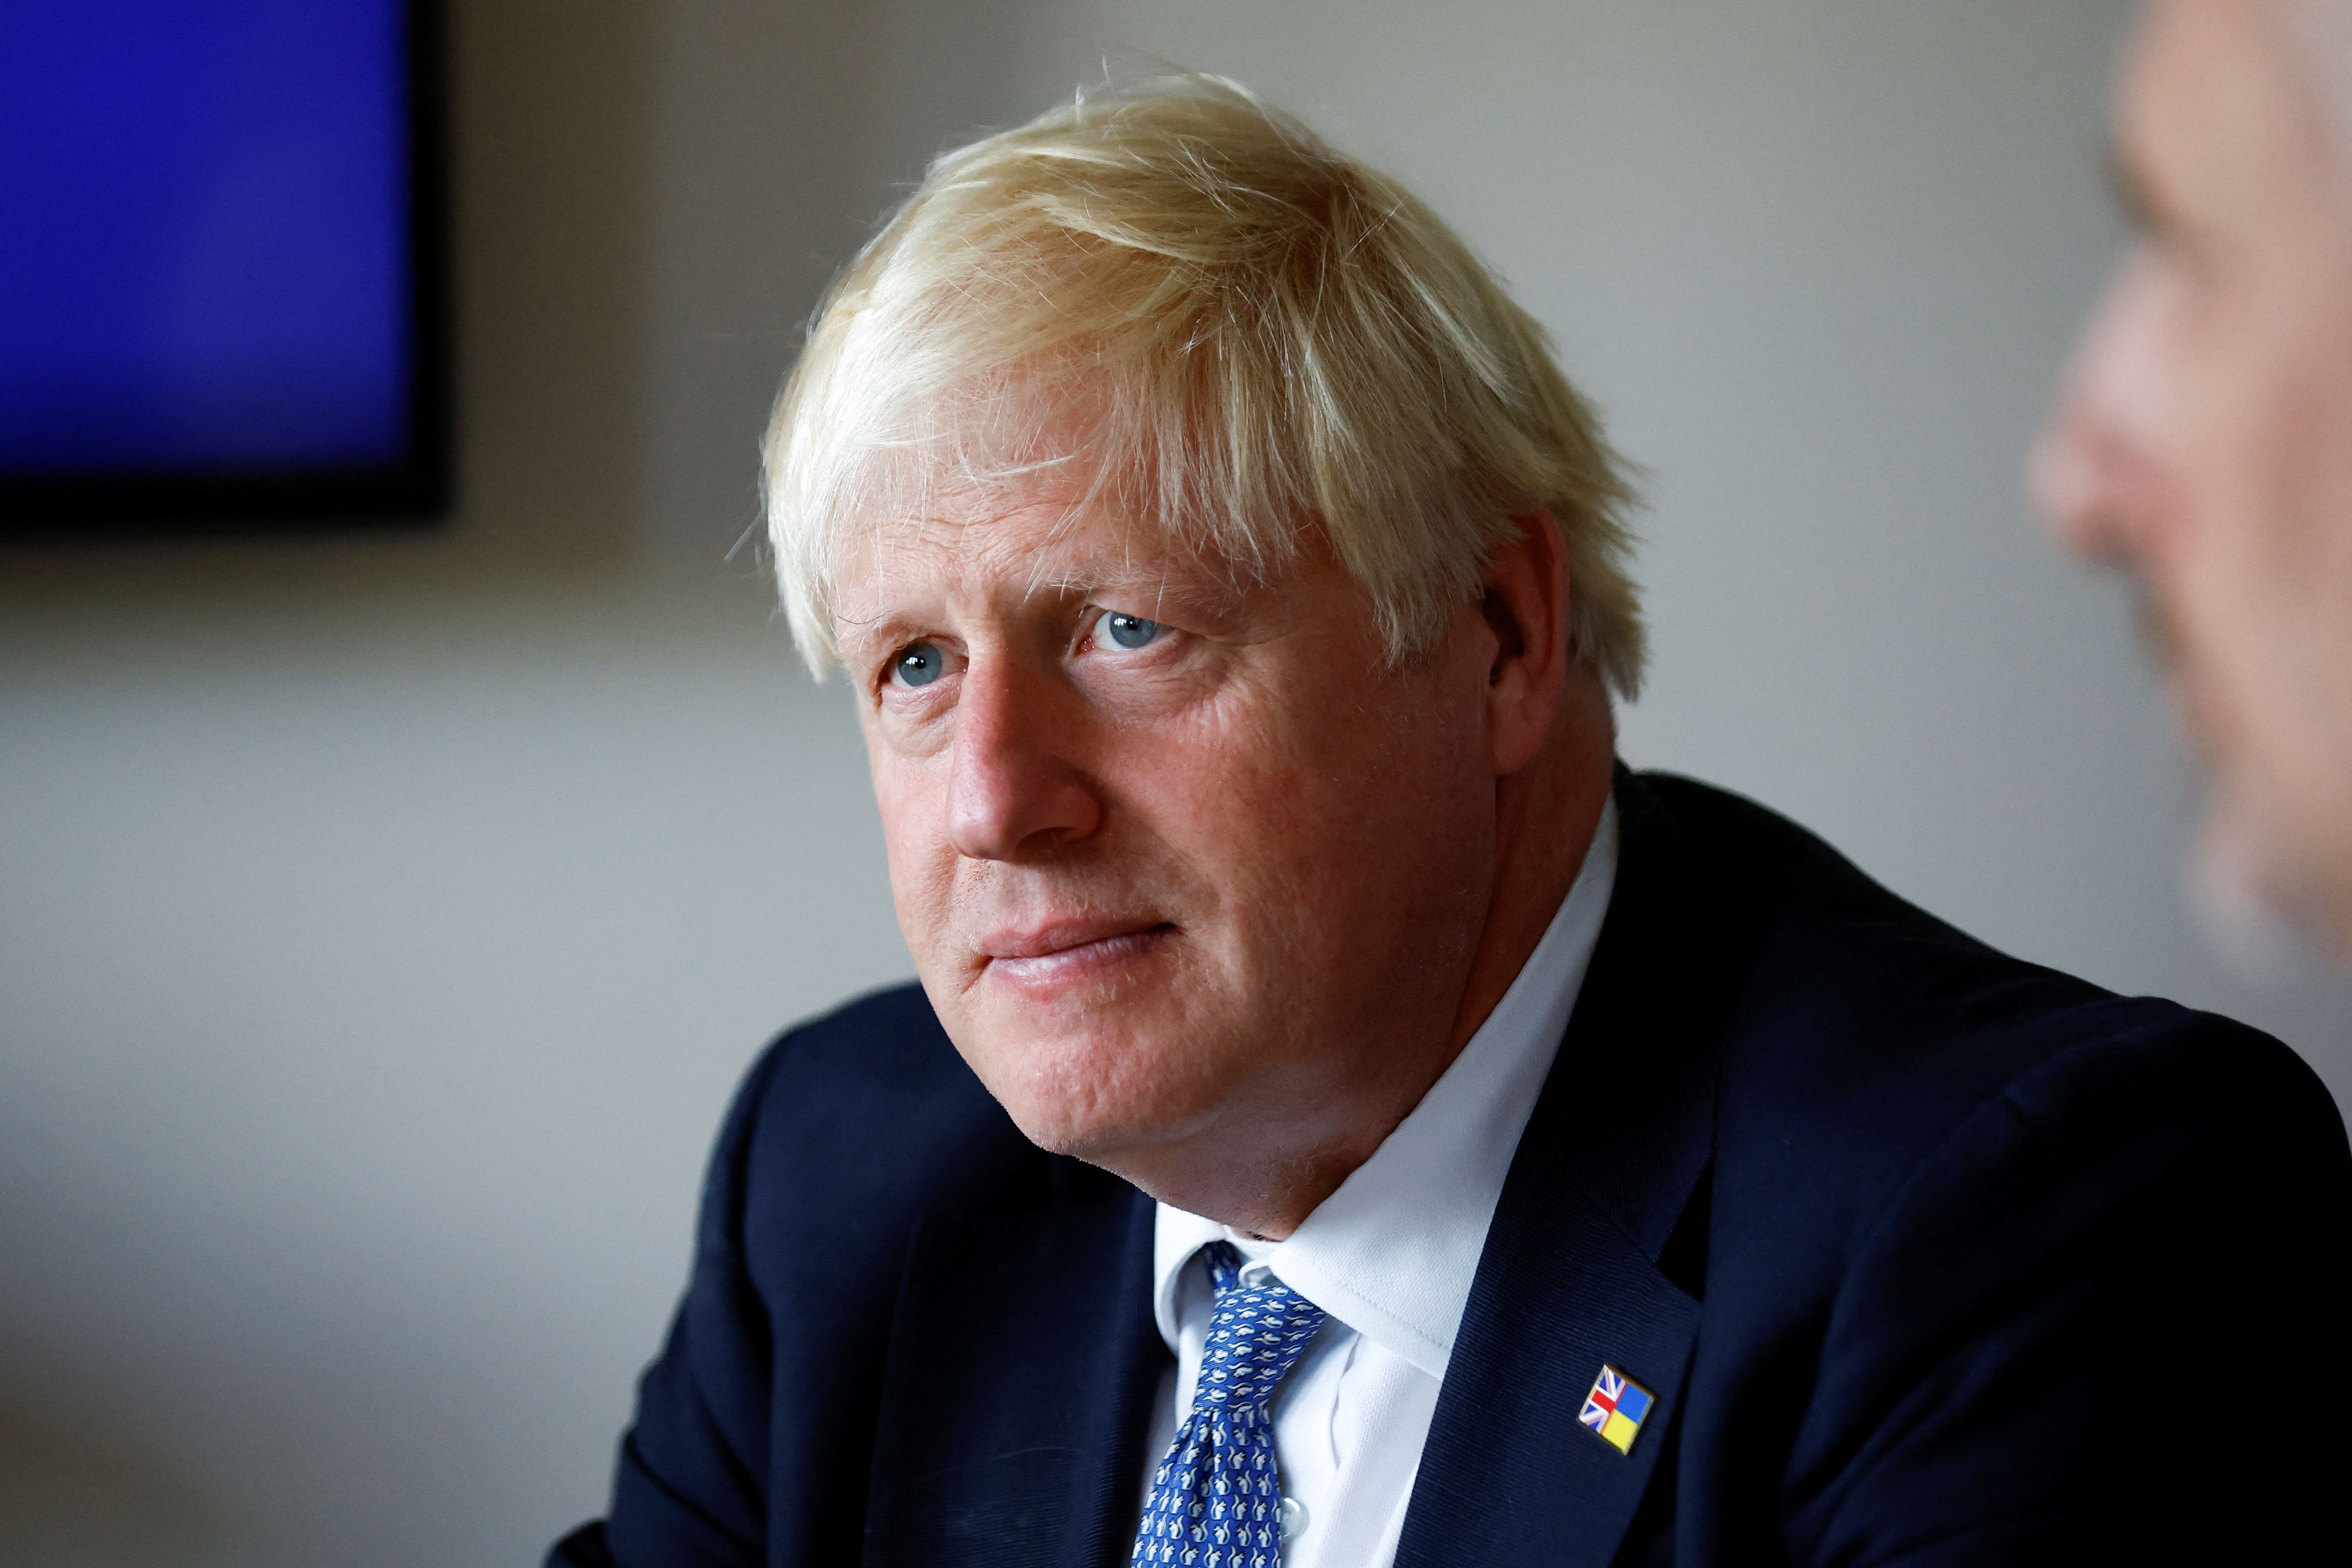 Why should taxpayers shell out to help Johnson?